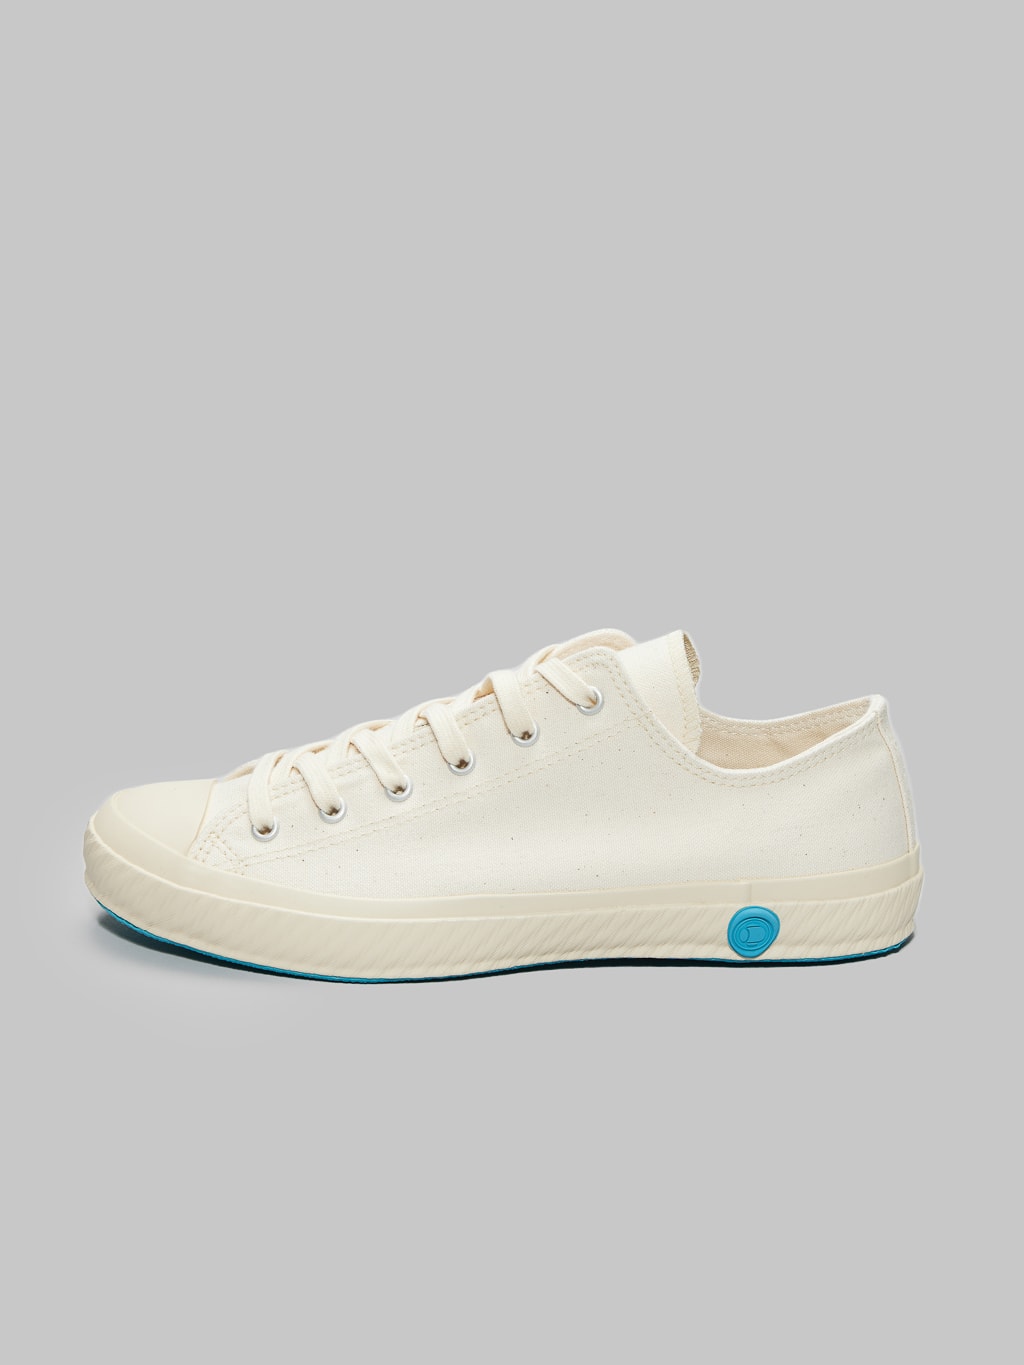 Shoes like pottery low white sneakers craftsmanship